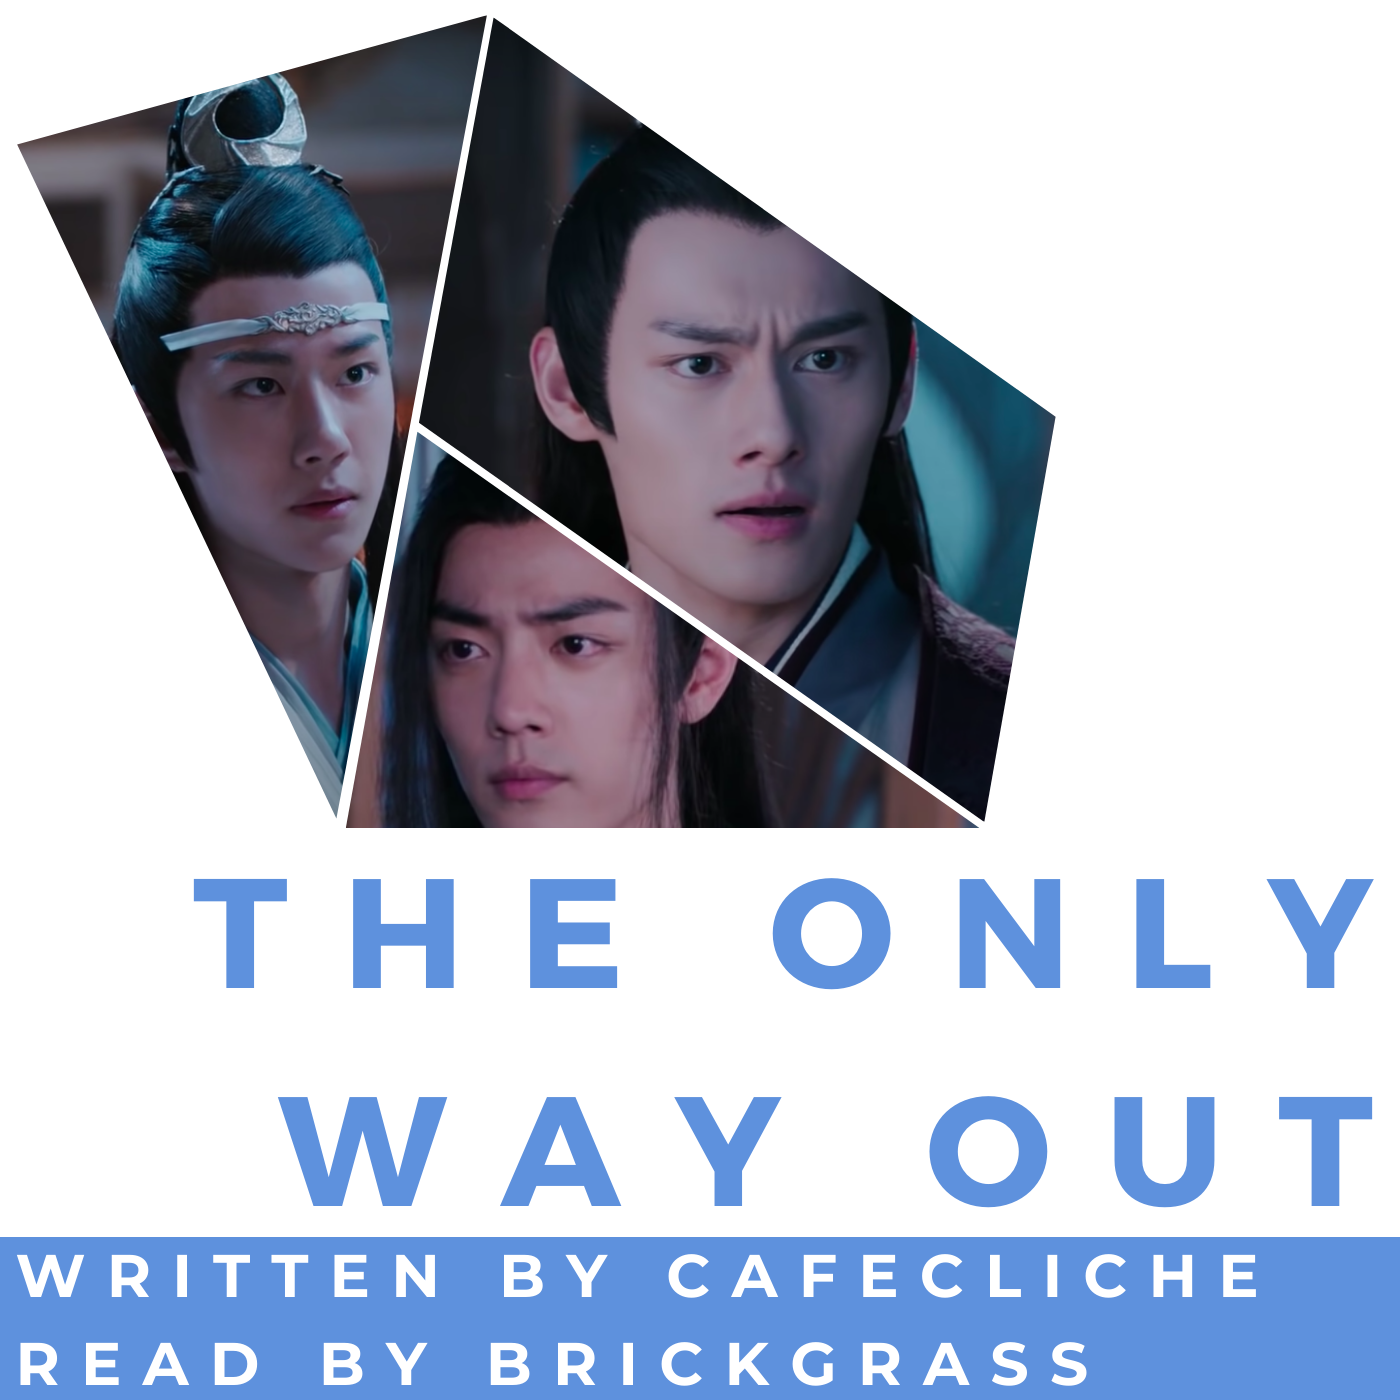 Podfic cover art with collaged shape containing pictures of Lan Wangji, Jiang Cheng and Wei Wuxian. Below is some text reading: the only way out, written by cafecliche, read by BrickGrass.